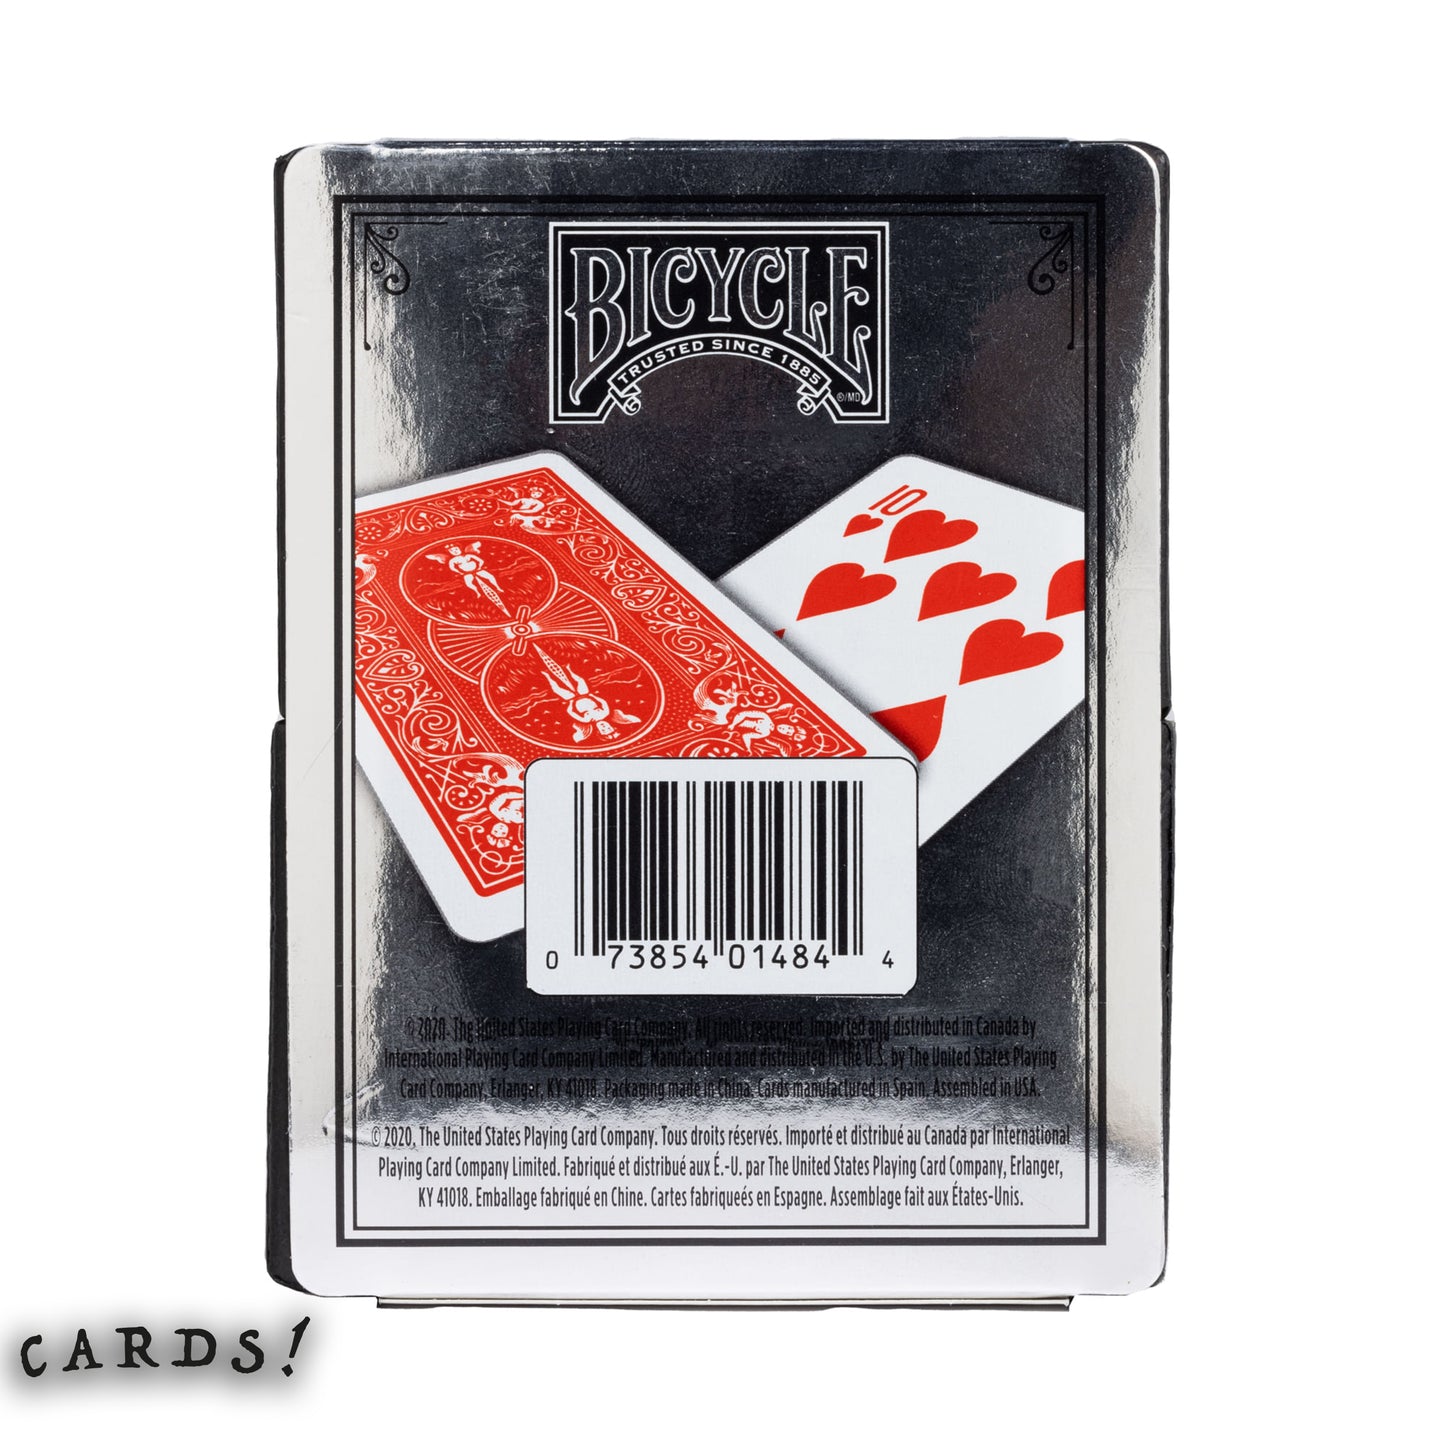 Bicycle® Prestige Plastic Playing Cards